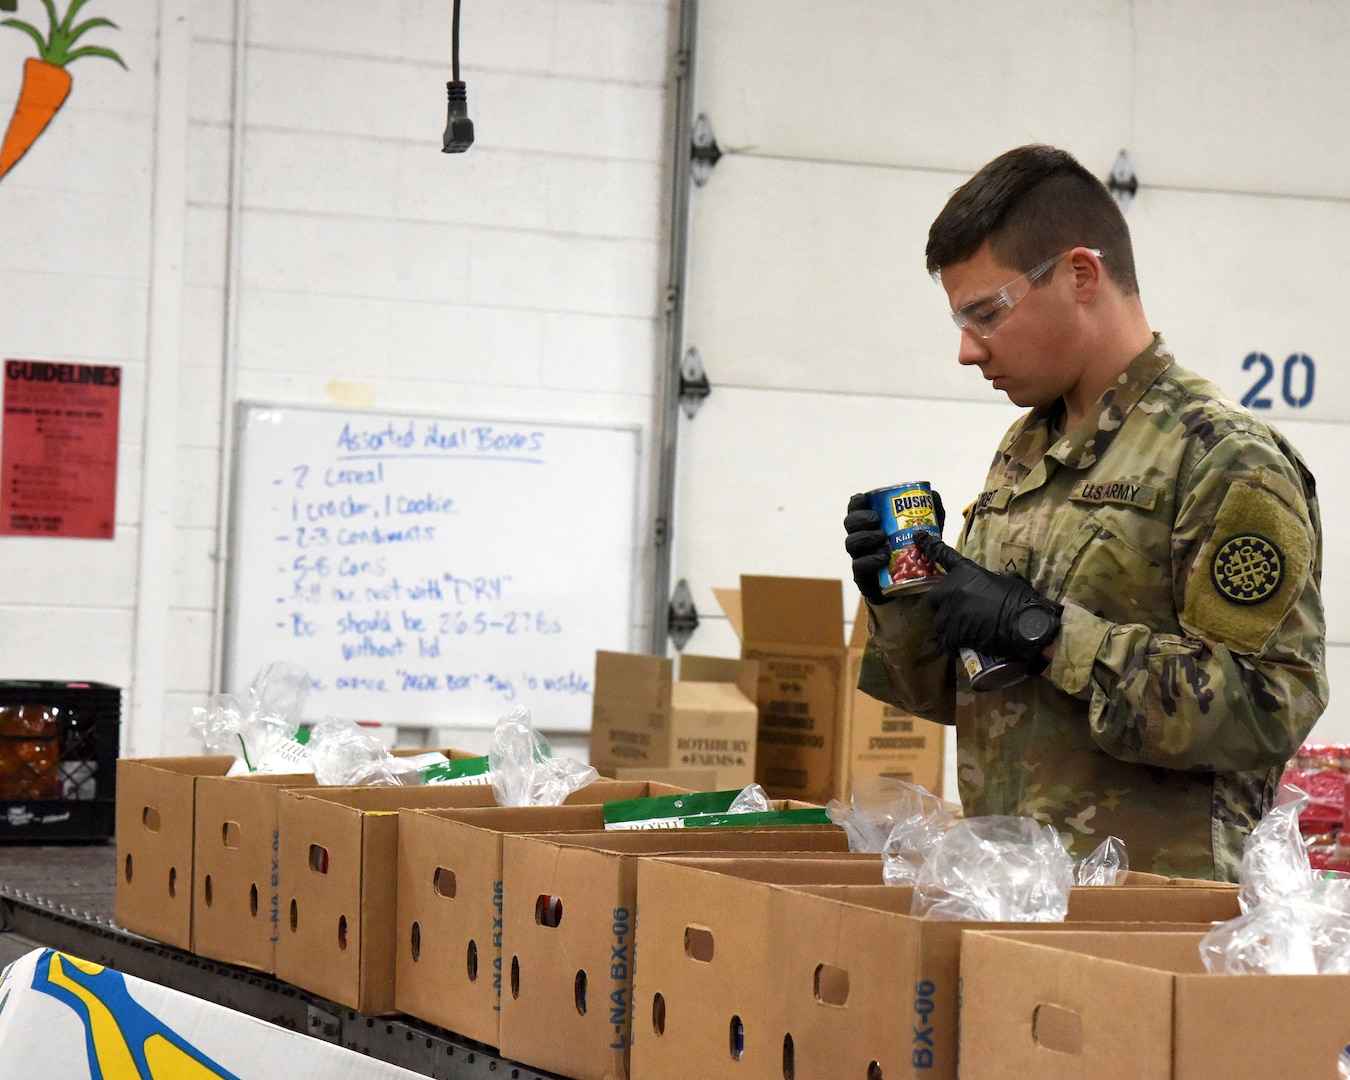 Michigan Army National Guard Soldiers assist the Feeding America West Michigan food bank, which feeds people in 40 of 83 Michigan counties but was struggling to operate because its volunteers were sent home to protect them from the COVID-19 pandemic, Comstock Park, Michigan, March 31, 2020.